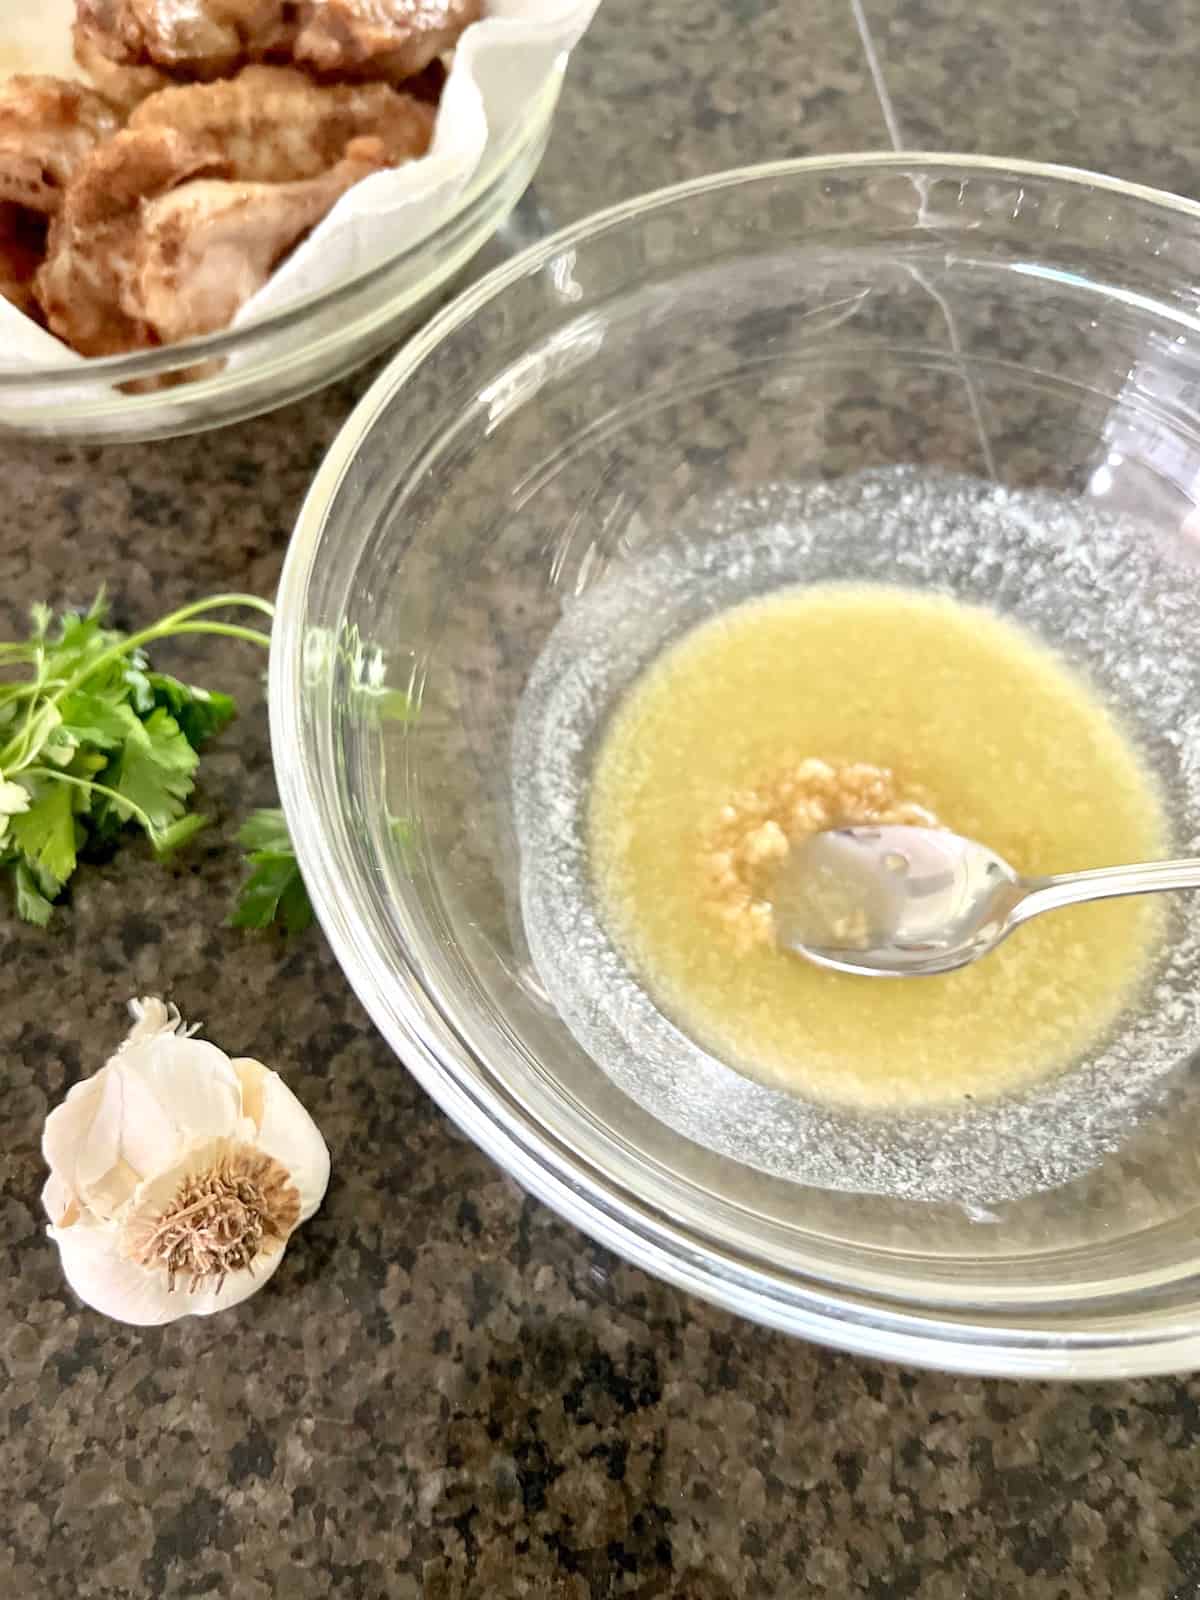 Mixing bowl with melted butter and garlic.